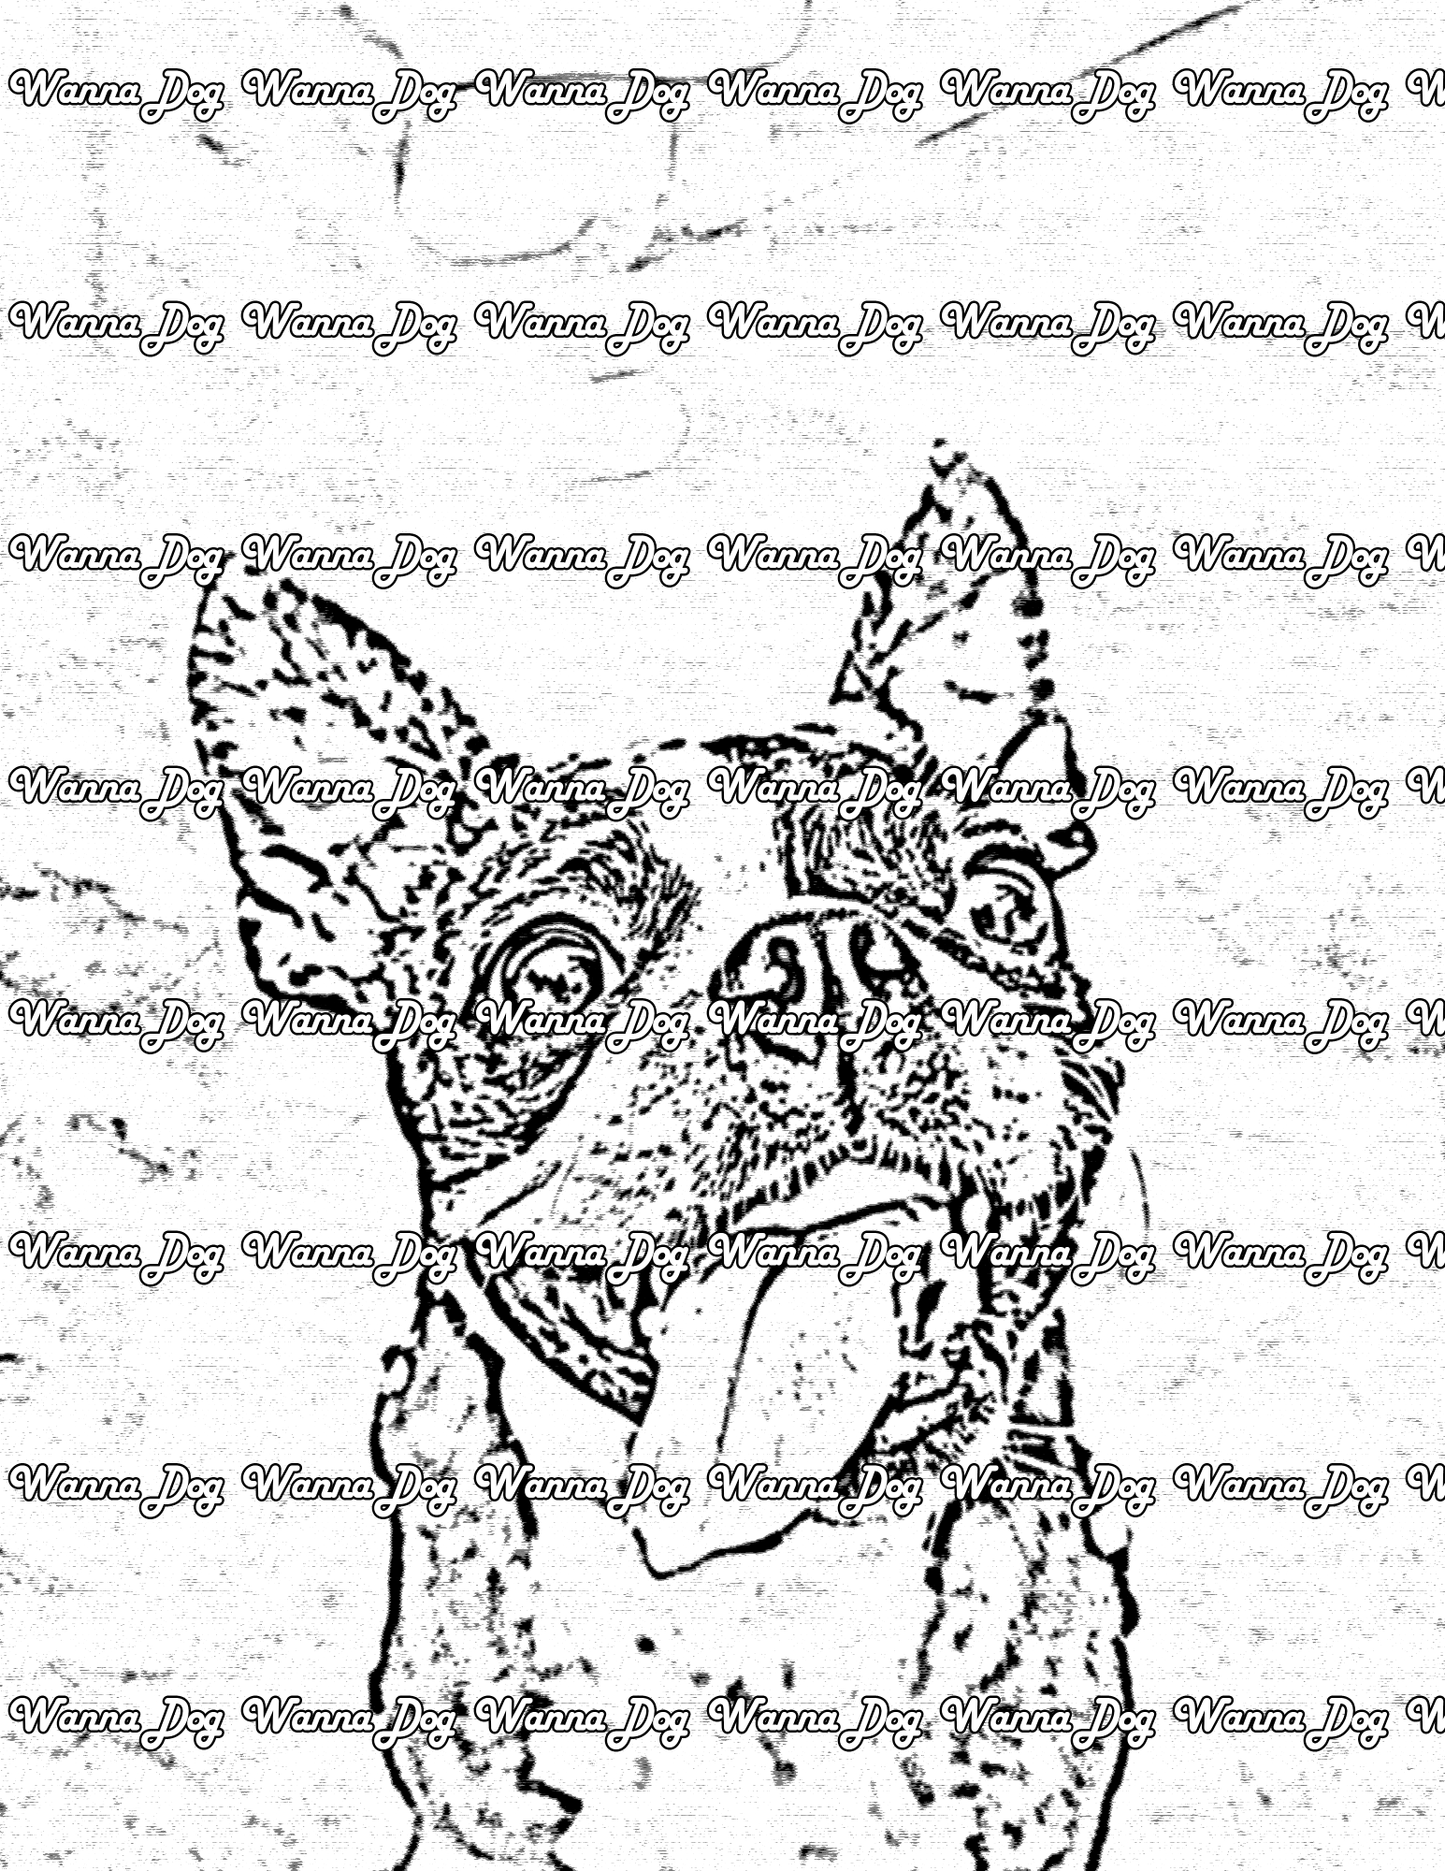 Boston Terrier Coloring Page of a Boston Terrier with their head tilted and tongue out